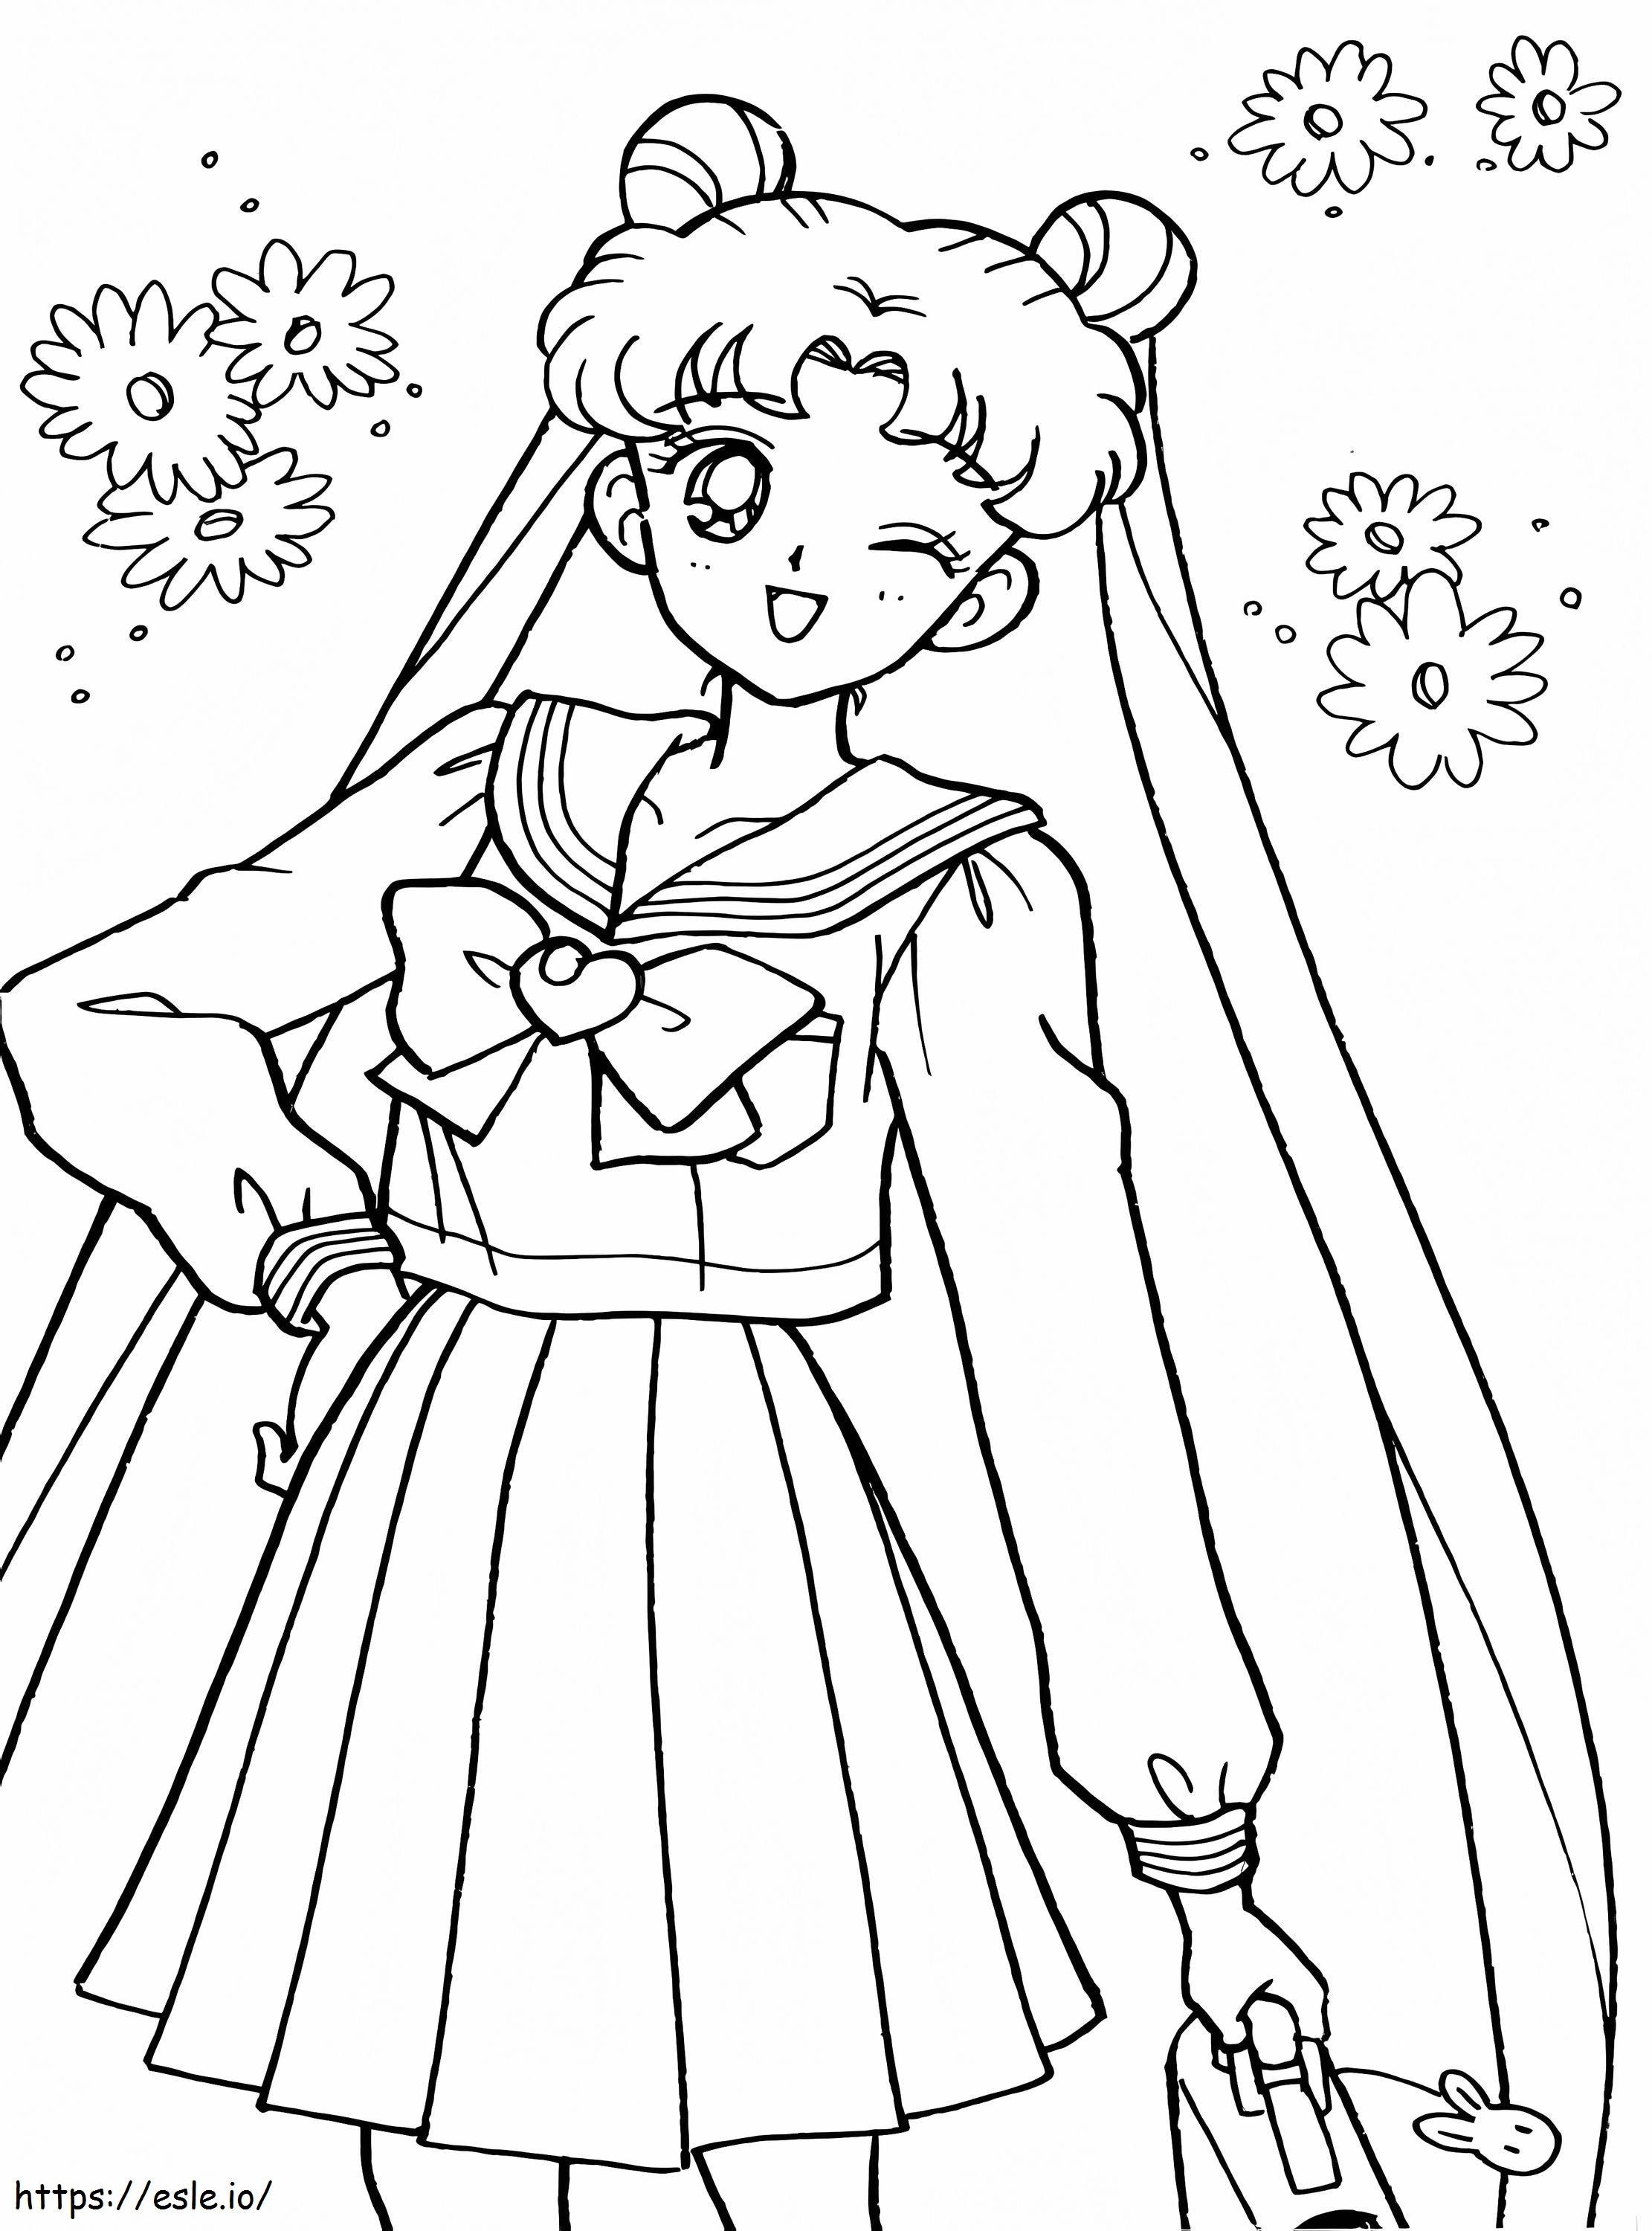 Sailor Moon Smiling coloring page